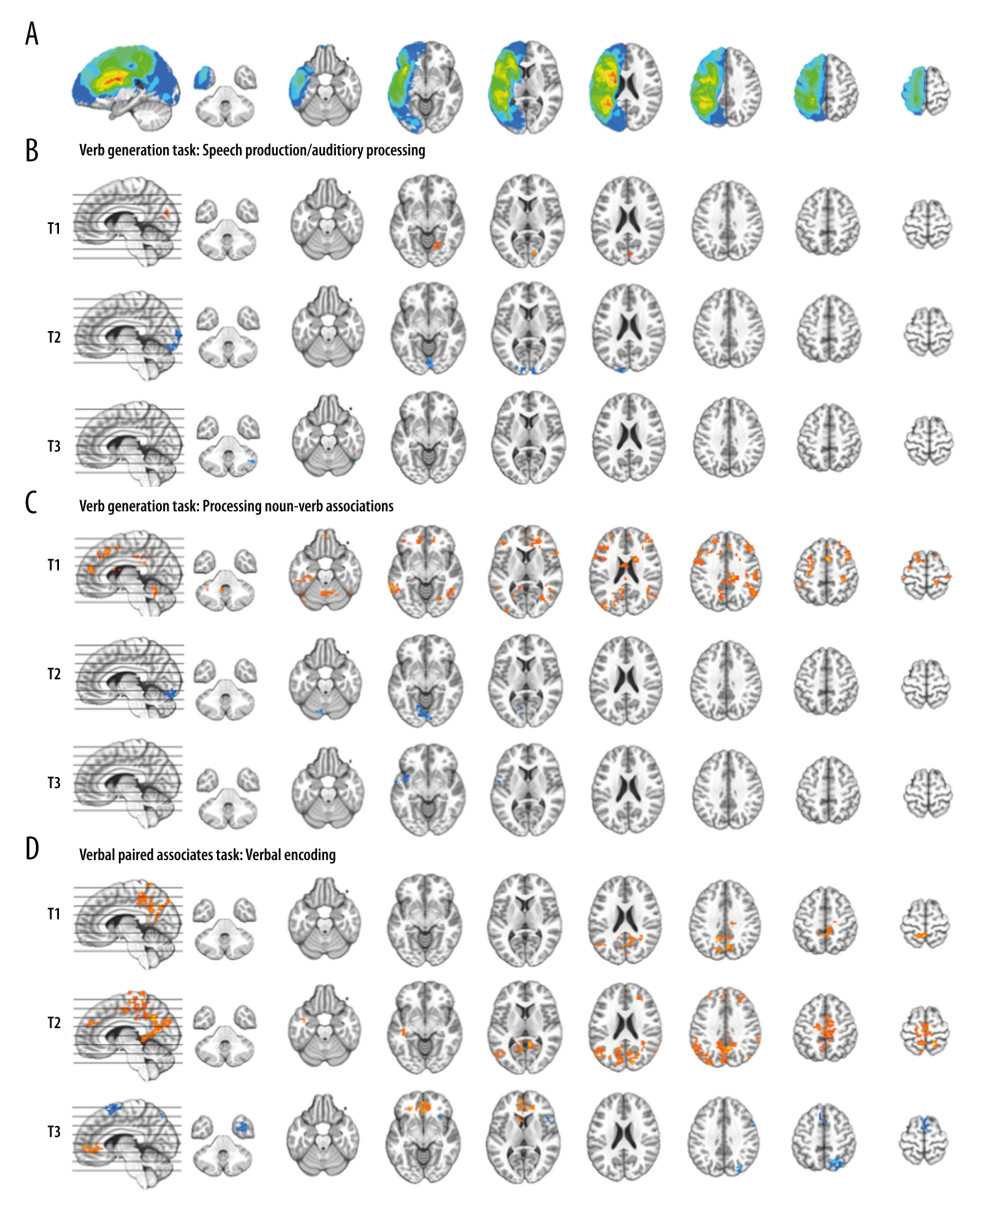 Composite lesion map and functional magnetic resonance imaging (fMRI) activation for the 13 participants. The composite lesion map and fMRI task activation maps at baseline (T1), immediately after treatment (T2) and at 3-month follow-up (T3; n=12) are overlaid onto a standard anatomical brain image in Montreal Neurologic Institute space. For all axial slices, left in the image is left in the brain. (A) The composite lesion map color scale ranges from the minimum (n=1 in blue) to the maximum (n=10 in red) number of participants that show overlap of lesions. (B) Statistical maps illustrating whole-brain fMRI activation patterns during speech production/auditory processing (“say verbs” vs “think verbs”) on the verb generation task are diminished at all 3 time points. Activation clusters are significant at corrected p<0.05 (voxelwise p=0.05, cluster threshold of 2079 mm3). (C) Activation related to processing noun-verb semantic associations on the verb generation task (“say verbs” vs “repeat nouns”) are present in frontal, temporal and parietal regions at T1 with minimal activation at T2 and T3. Activation clusters are significant at corrected p<0.05 (voxelwise p=0.05, cluster threshold of 2079 mm3). (D) Statistical maps illustrating whole-brain fMRI activation patterns during verbal encoding (“generate” vs “read”) on the verbal paired associates task are similar at T1 and T2, and differing at T3. Activations are significant at p<0.05, corrected (voxelwise p=0.05, cluster threshold of 1836 mm3).